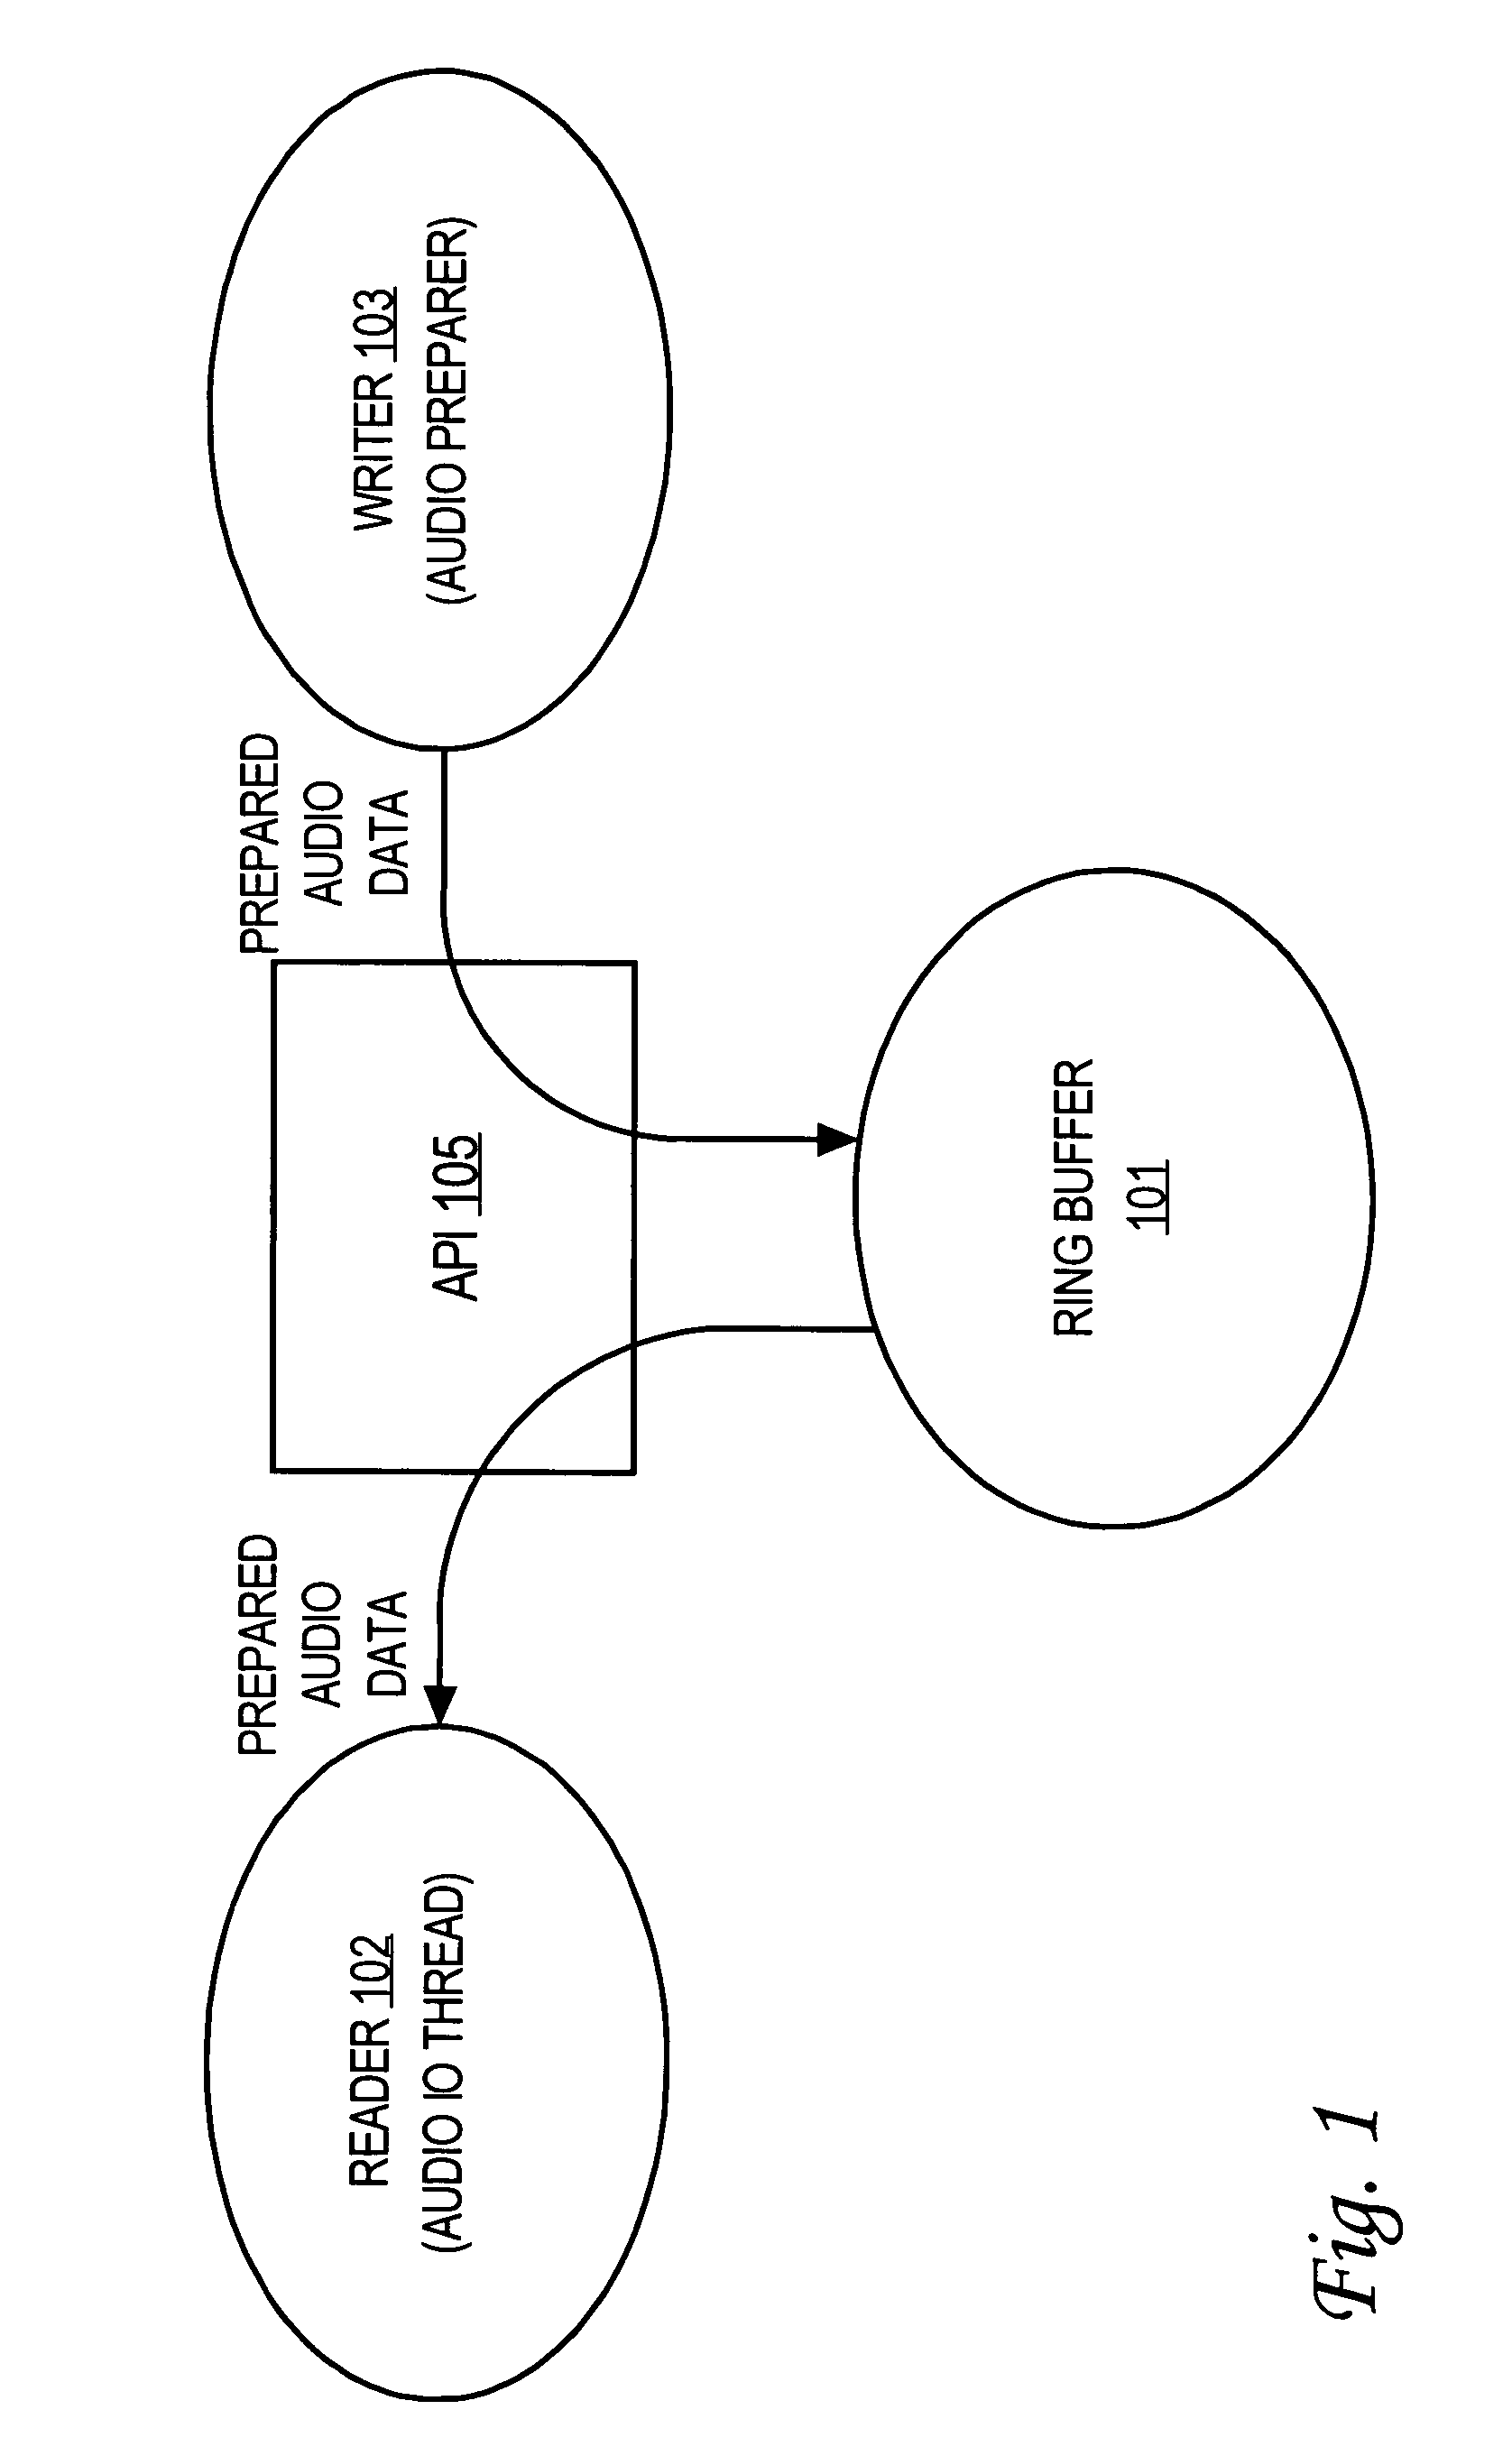 Lockless access to a ring buffer